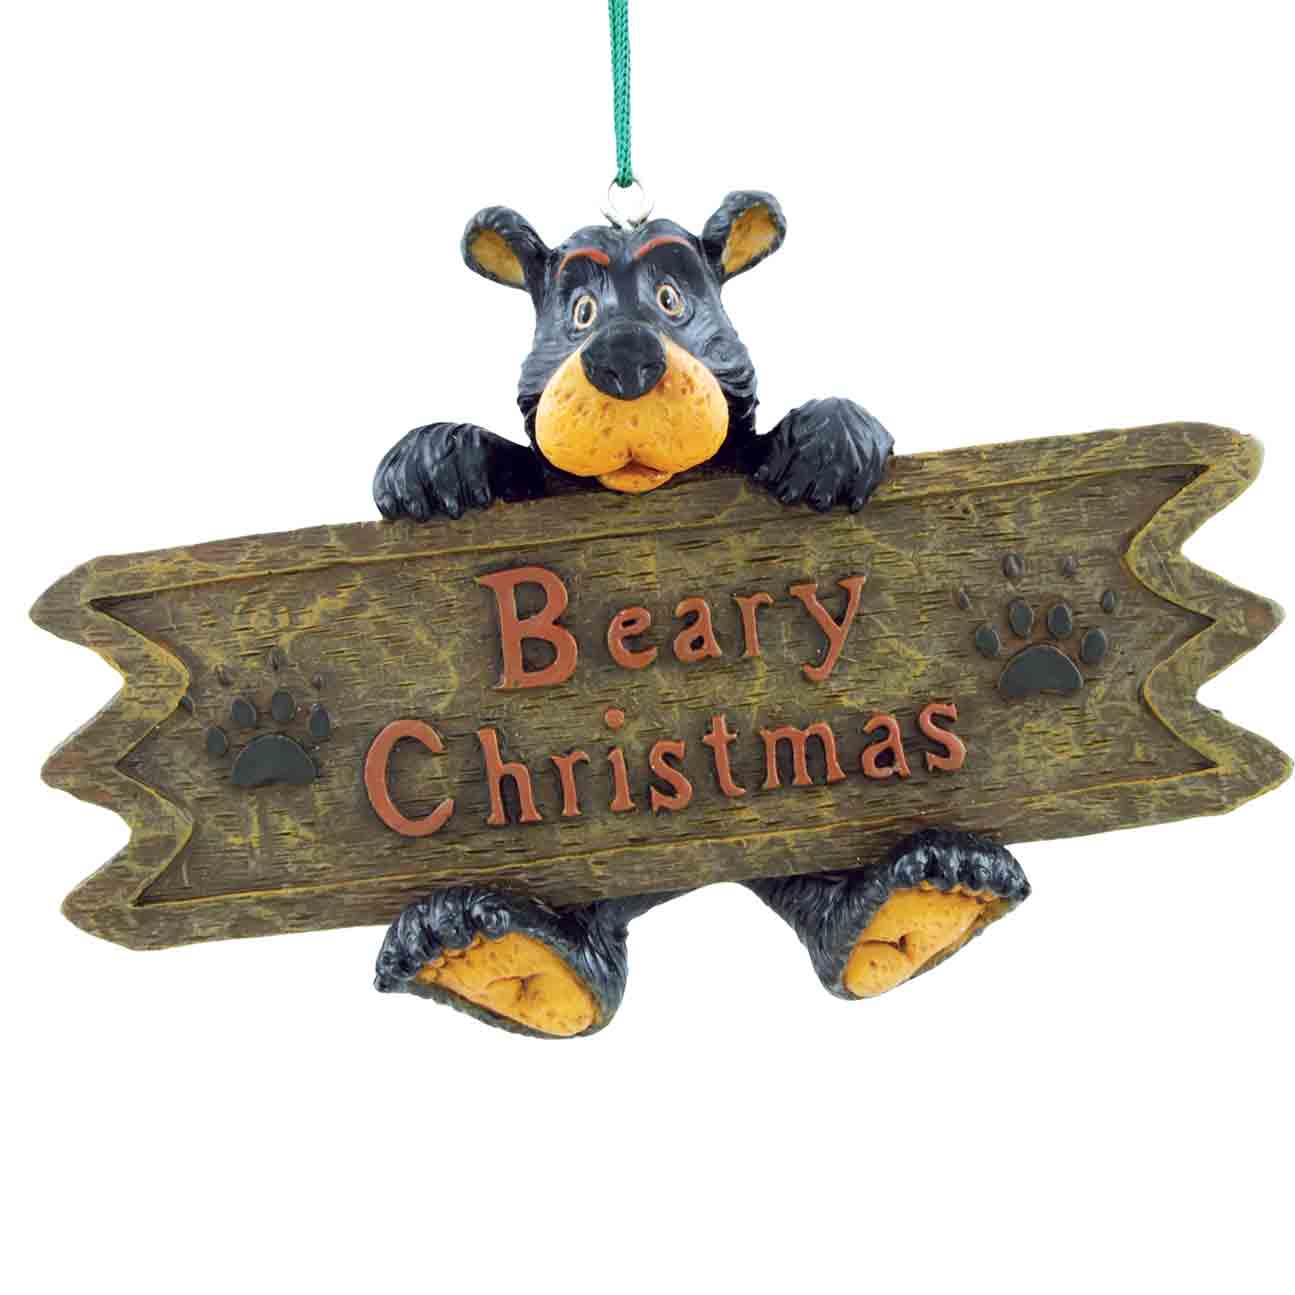 WILLIE BEARY CHRISTMAS ORNAMENT 12/BX